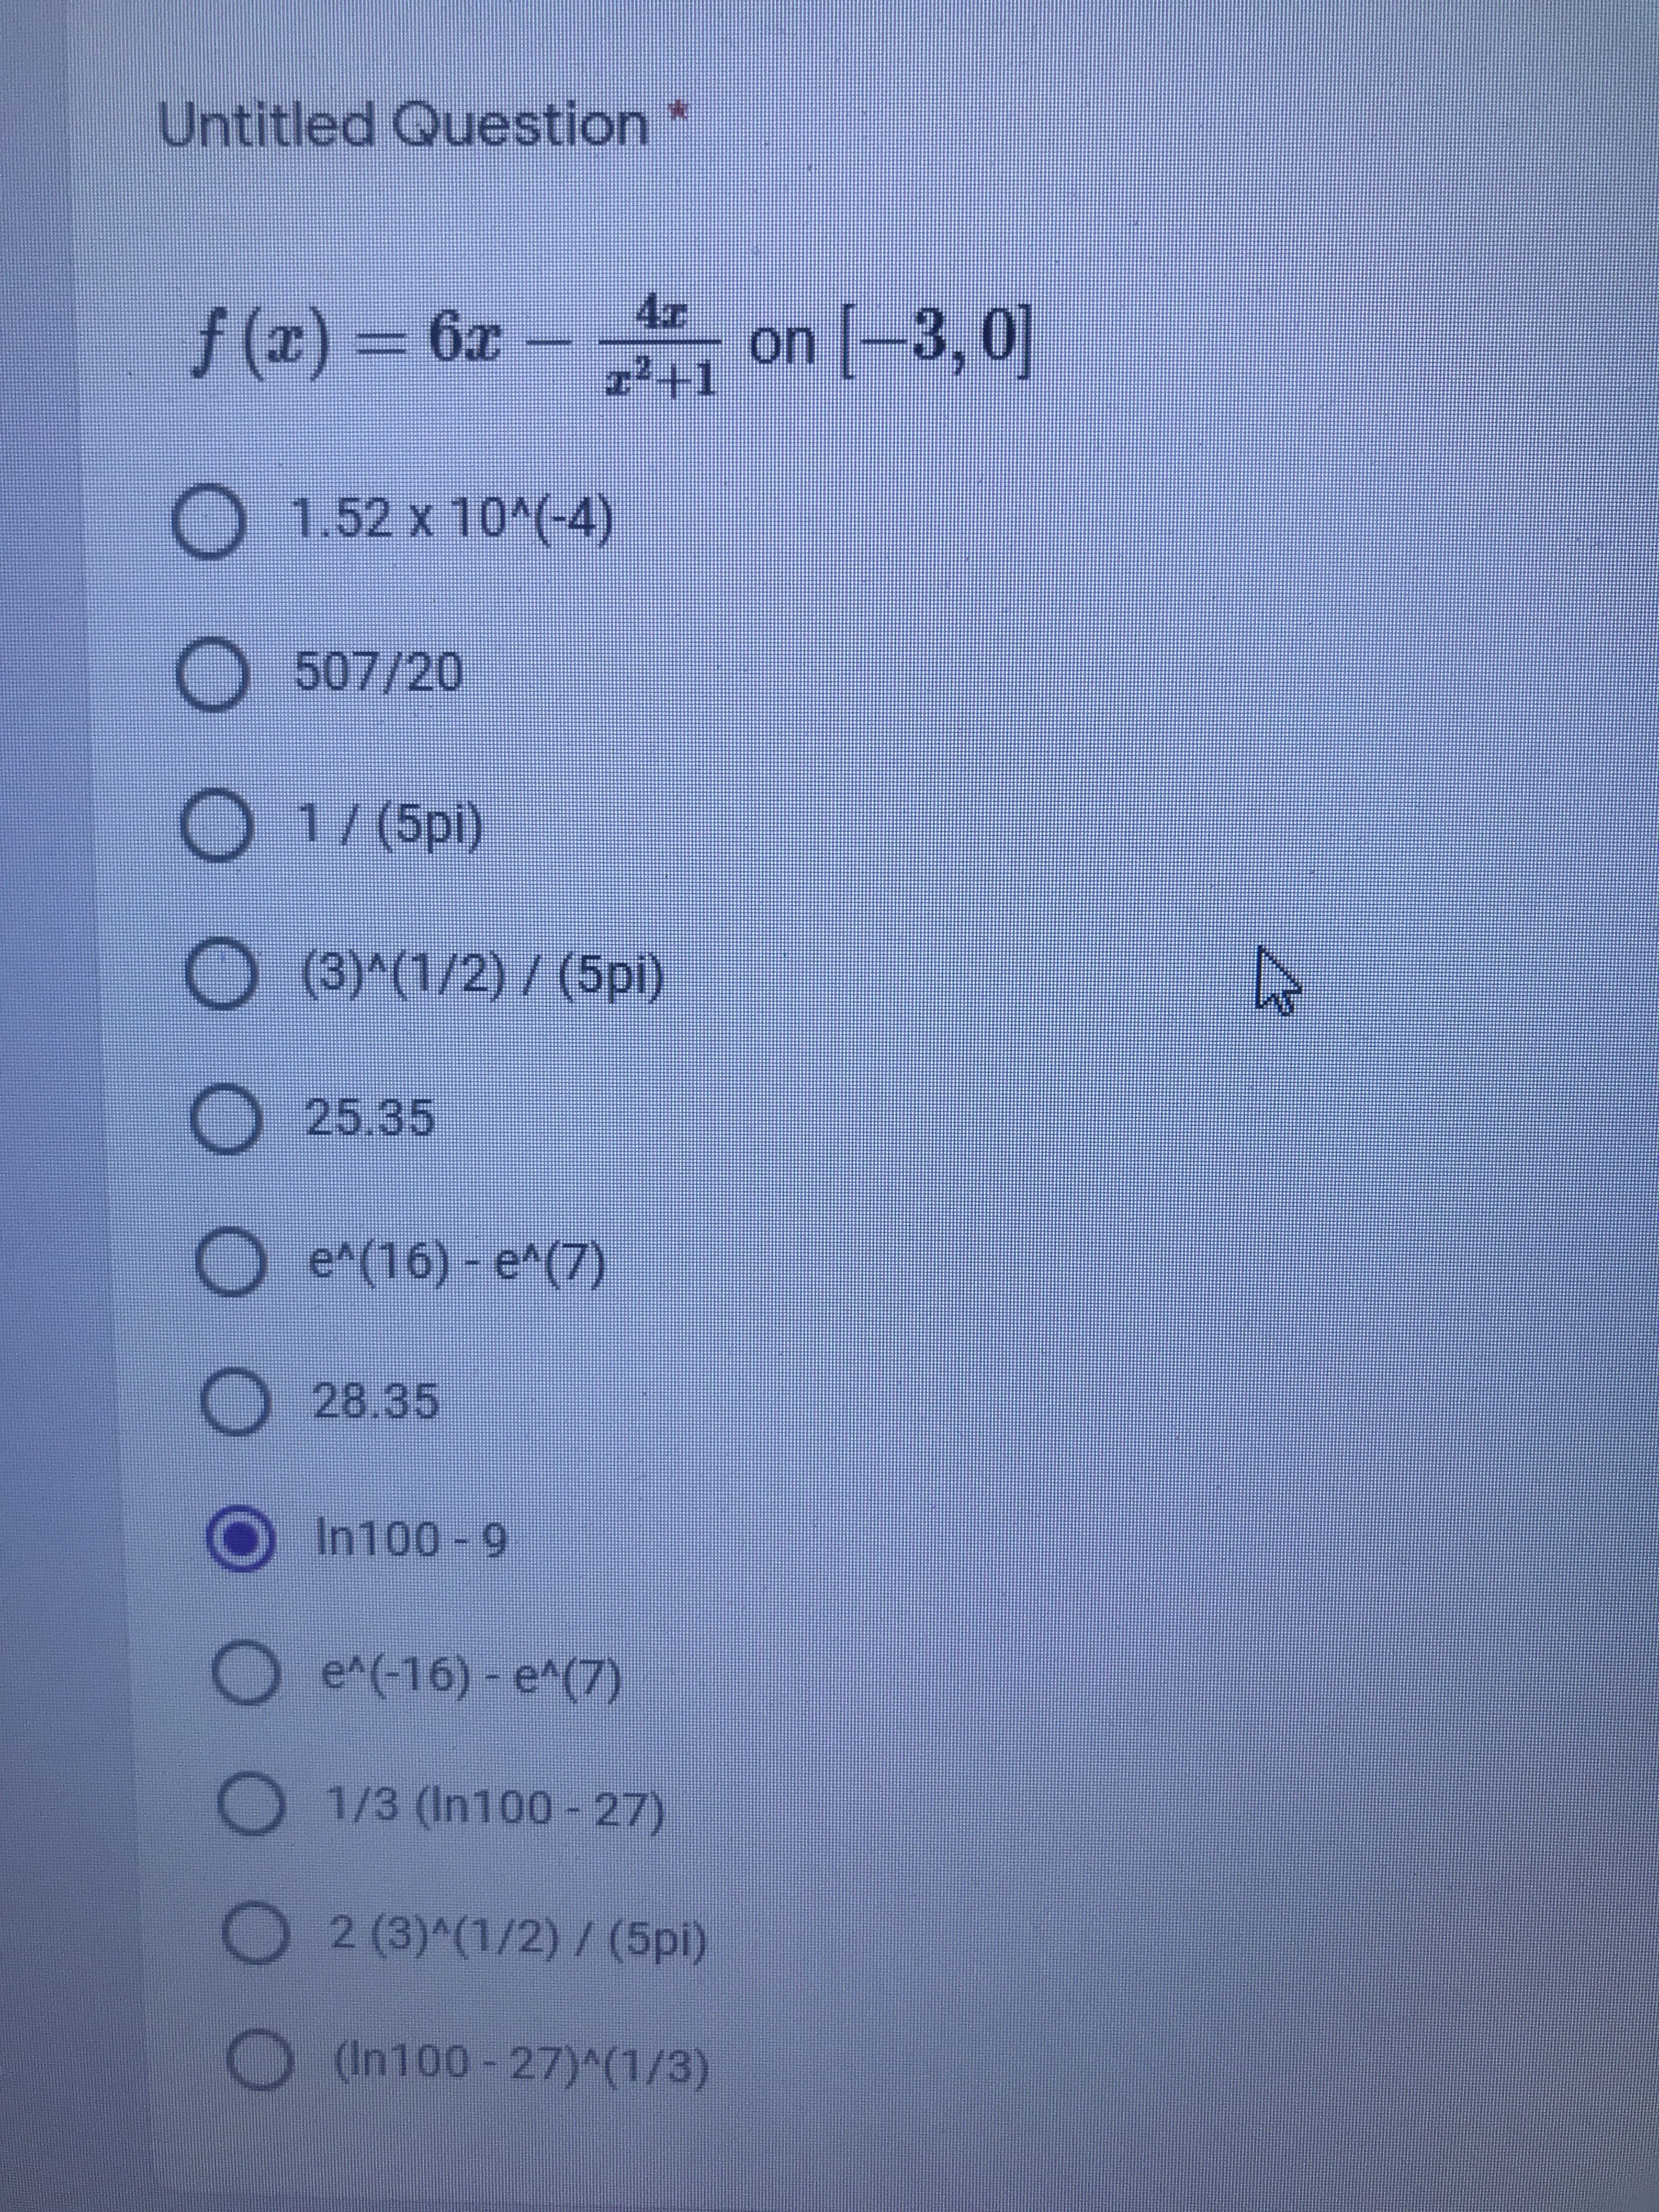 Untitled Question
4z
f (x) = 6x
on [-3,0]
+1
